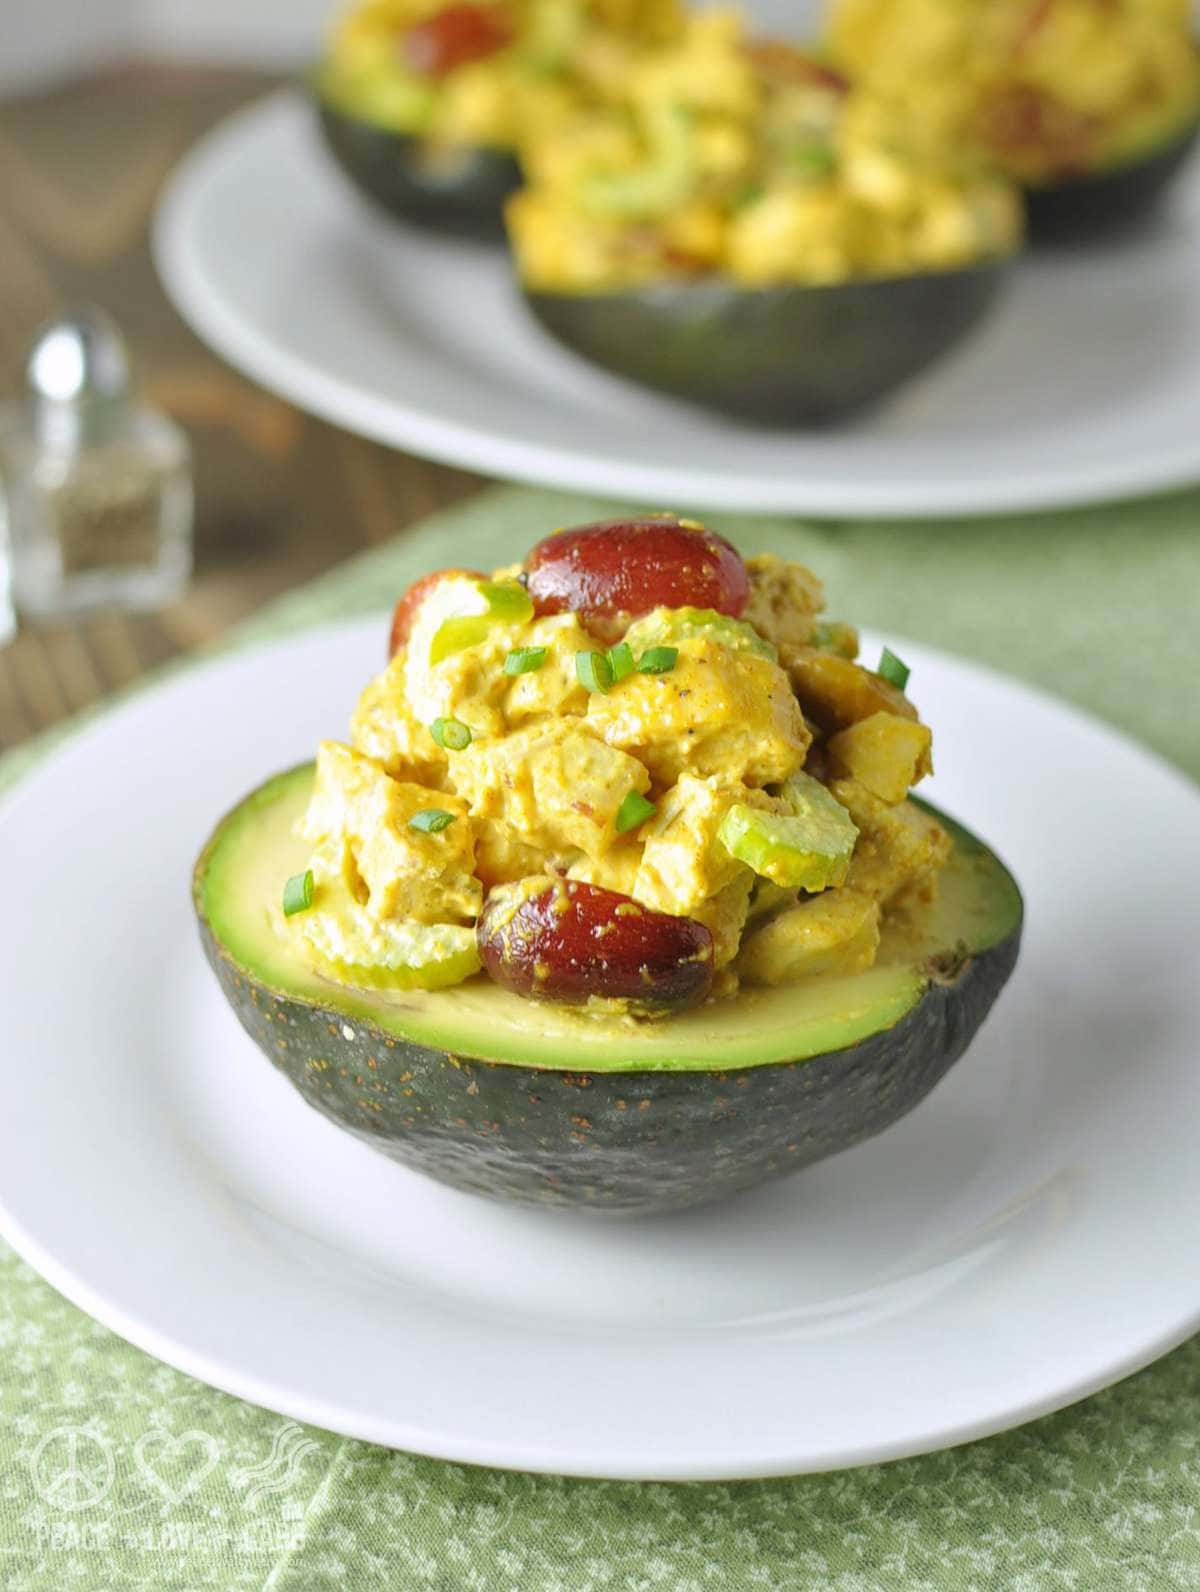 Curried Chicken Salad Stuffed Avocados - Paleo, Low Carb, Gluten Free | Peace Love and Low Carb